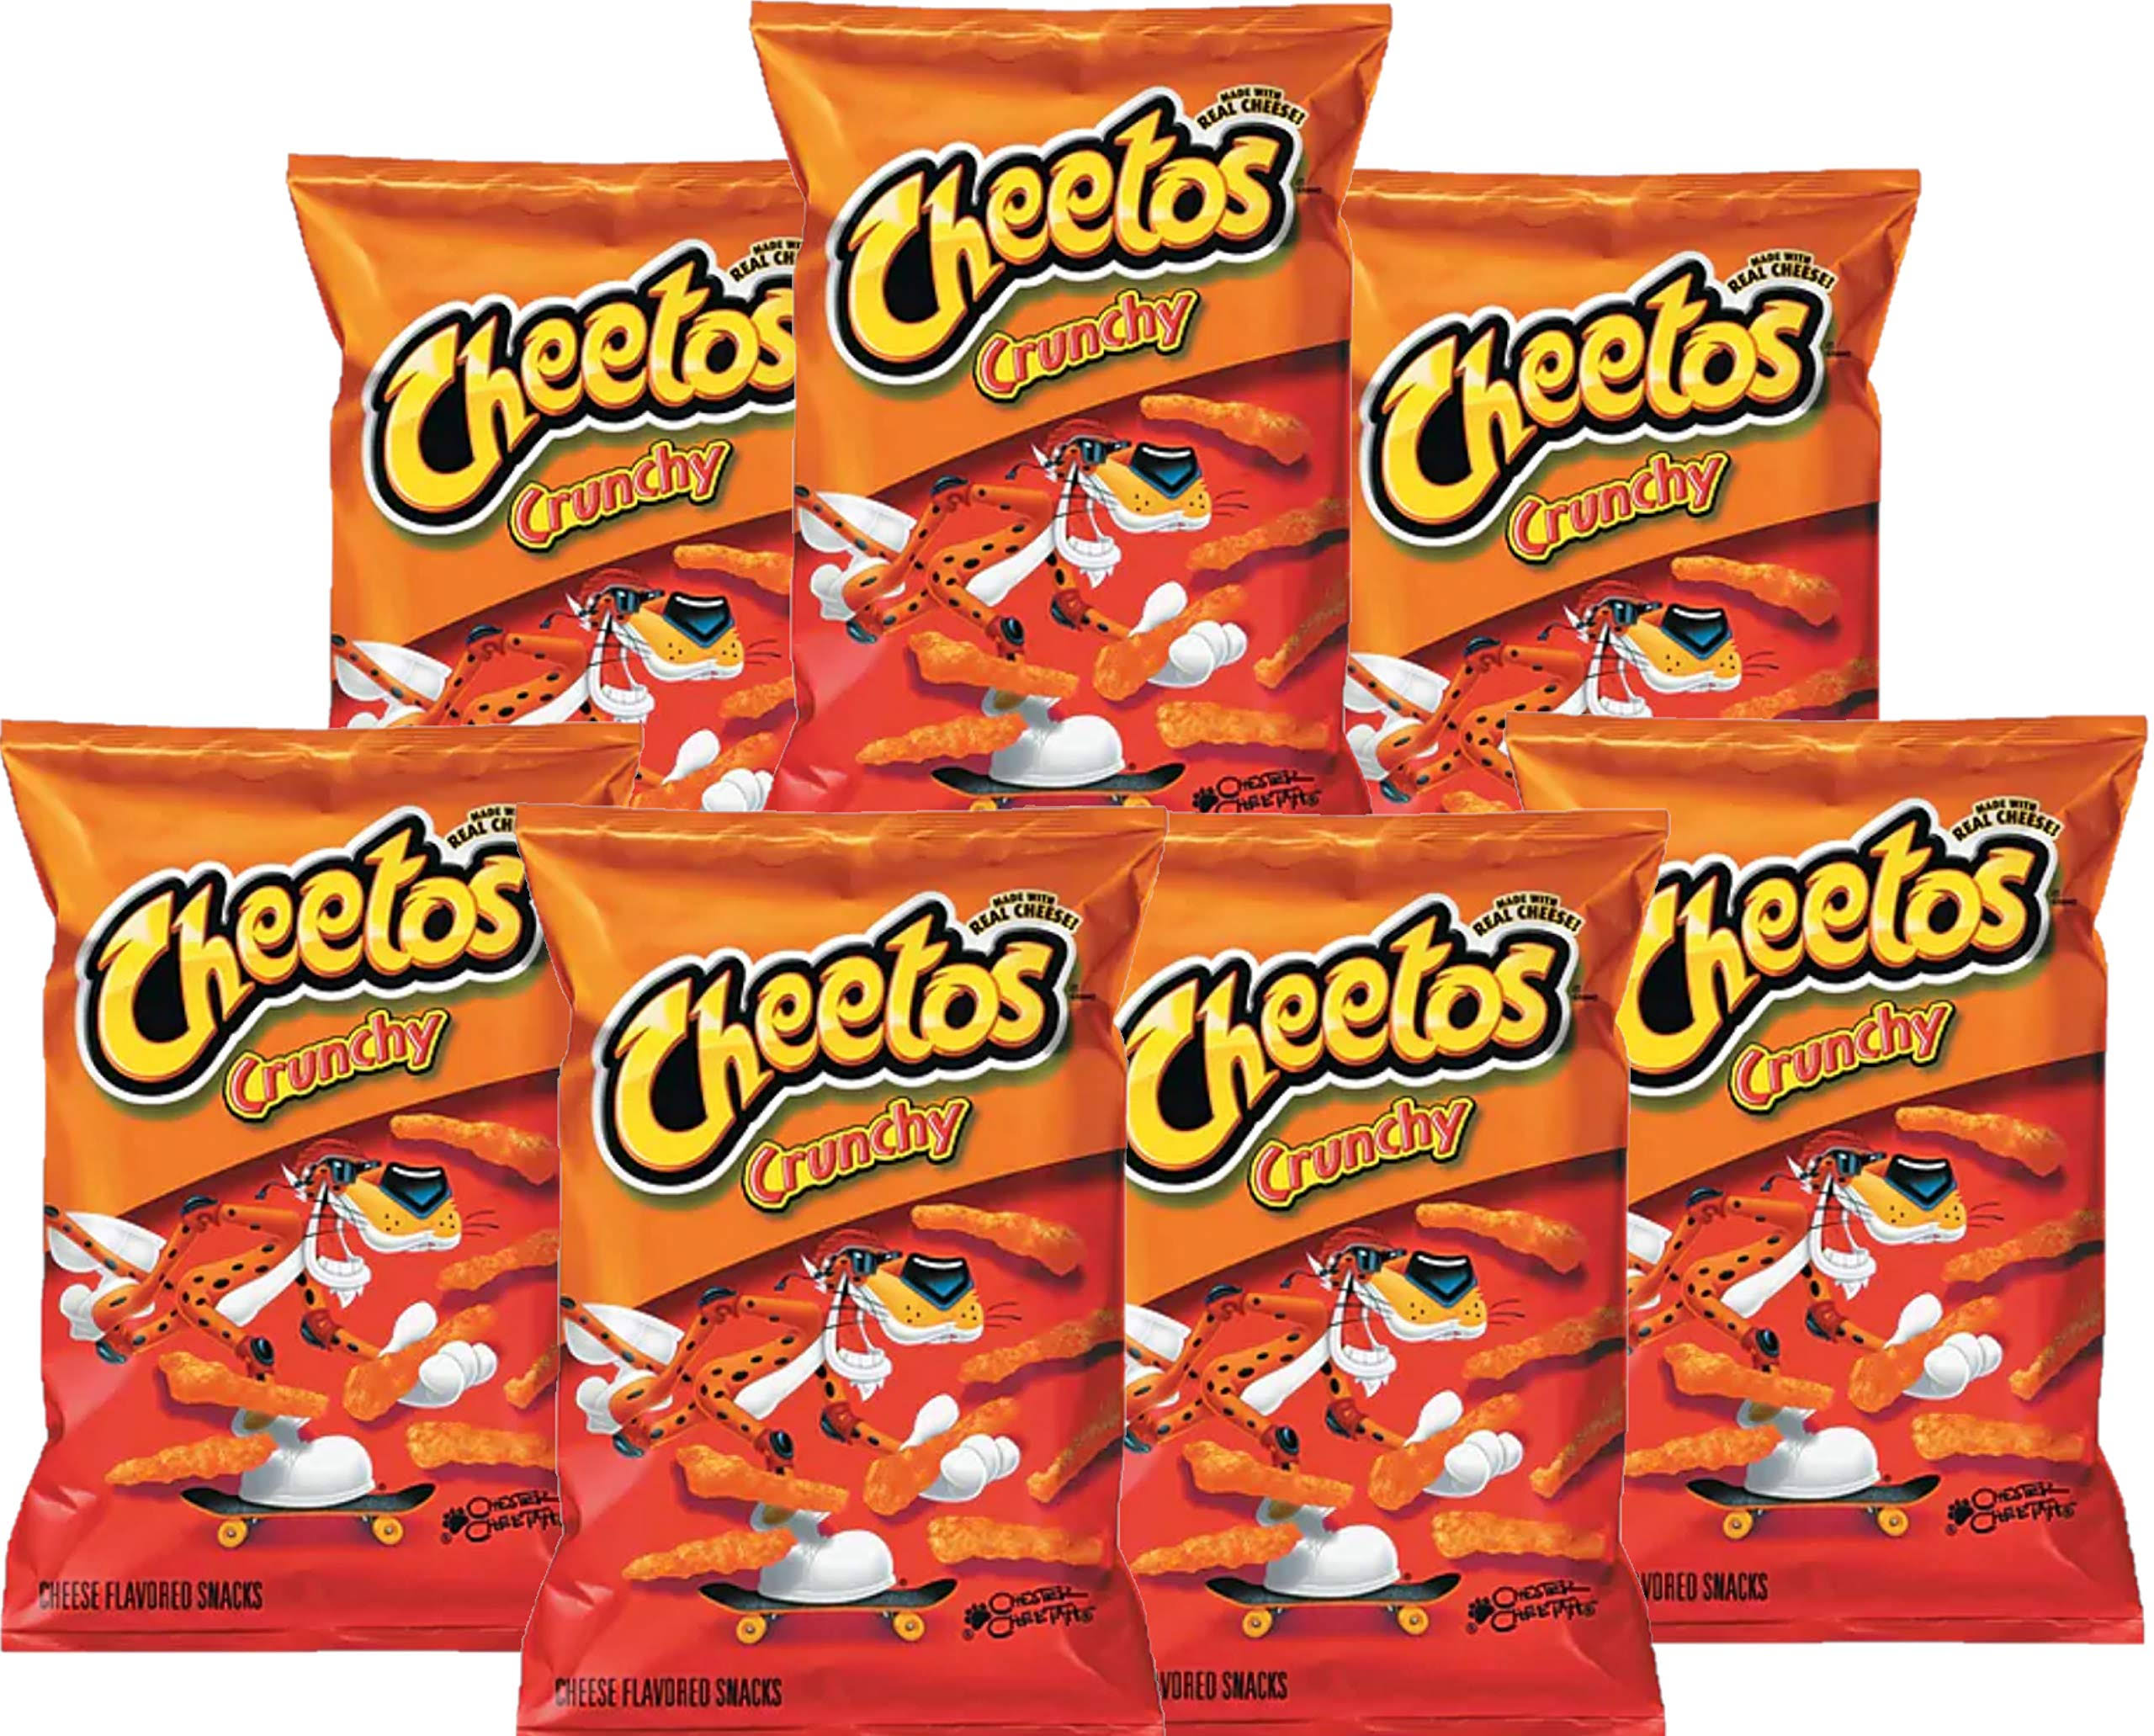 American Crunchy Cheese Cheetos (77.9g 7 Pack) Famous Spicy Cheesy Chili Corn Crisps Snacks Classic Popular Fun Bag Bulk Deal Fancy Appetizers Grab